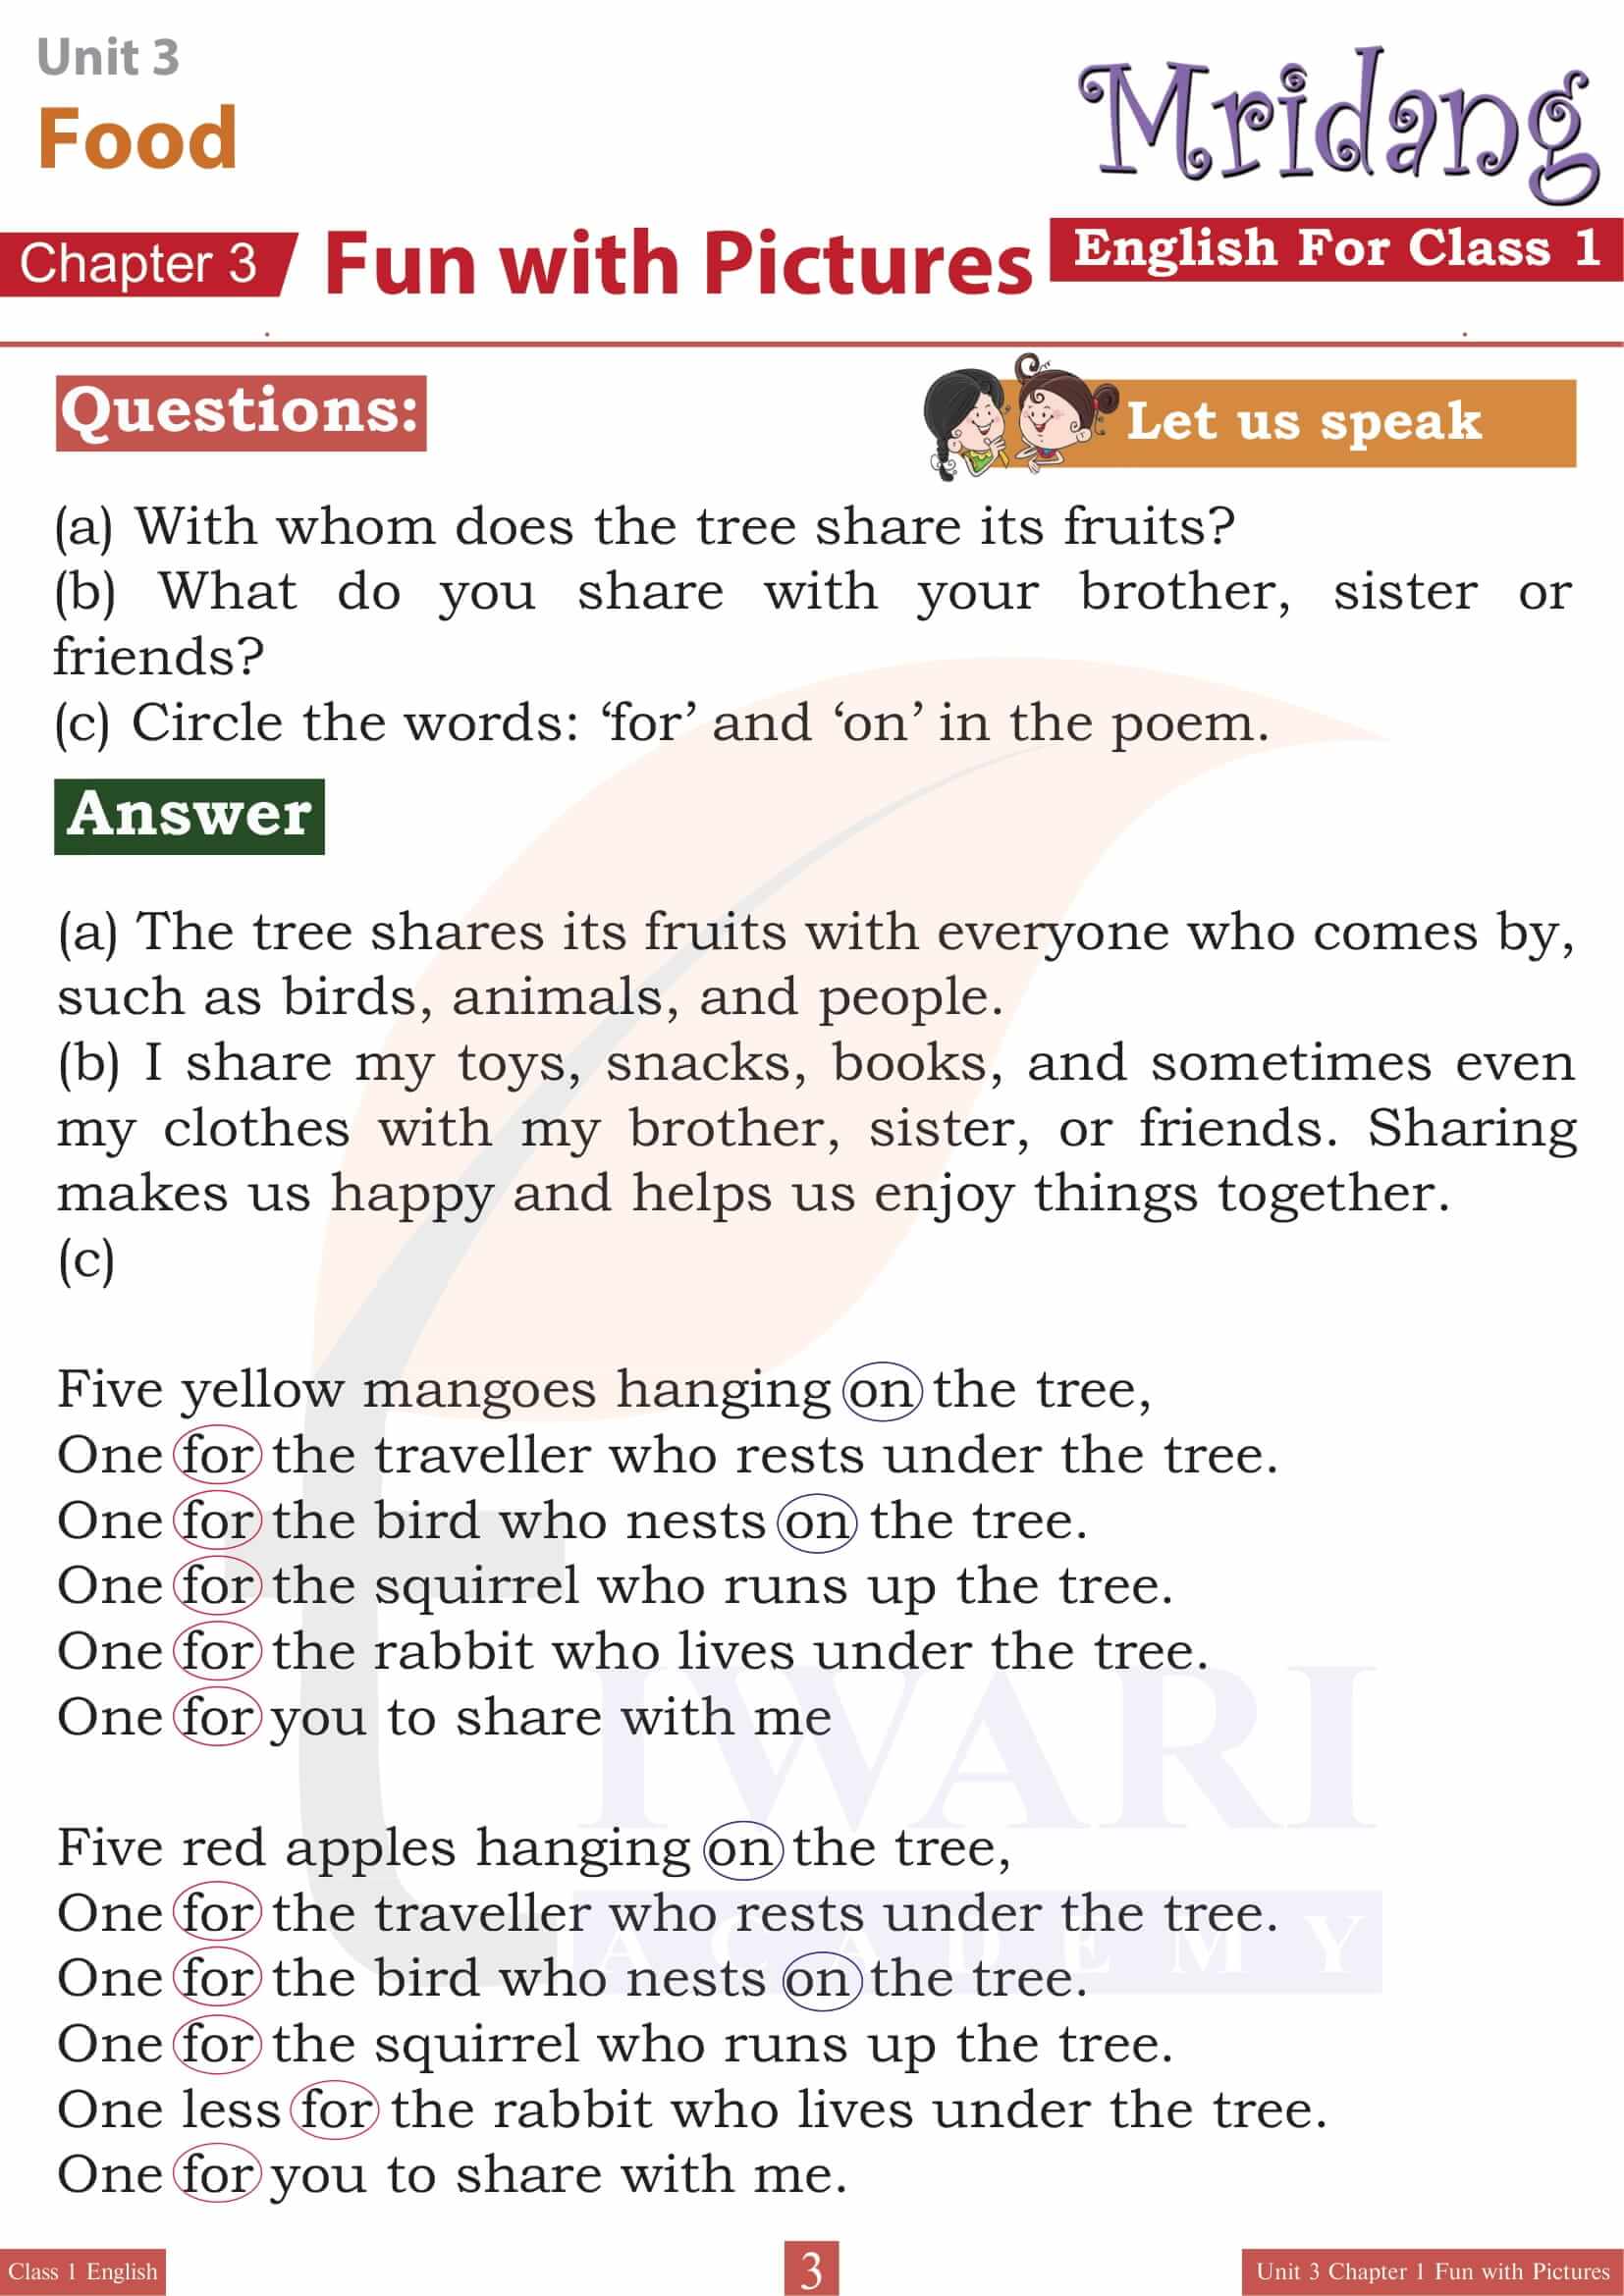 NCERT Solutions for Class 1 English Mridang Unit 3 Food Chapter 1